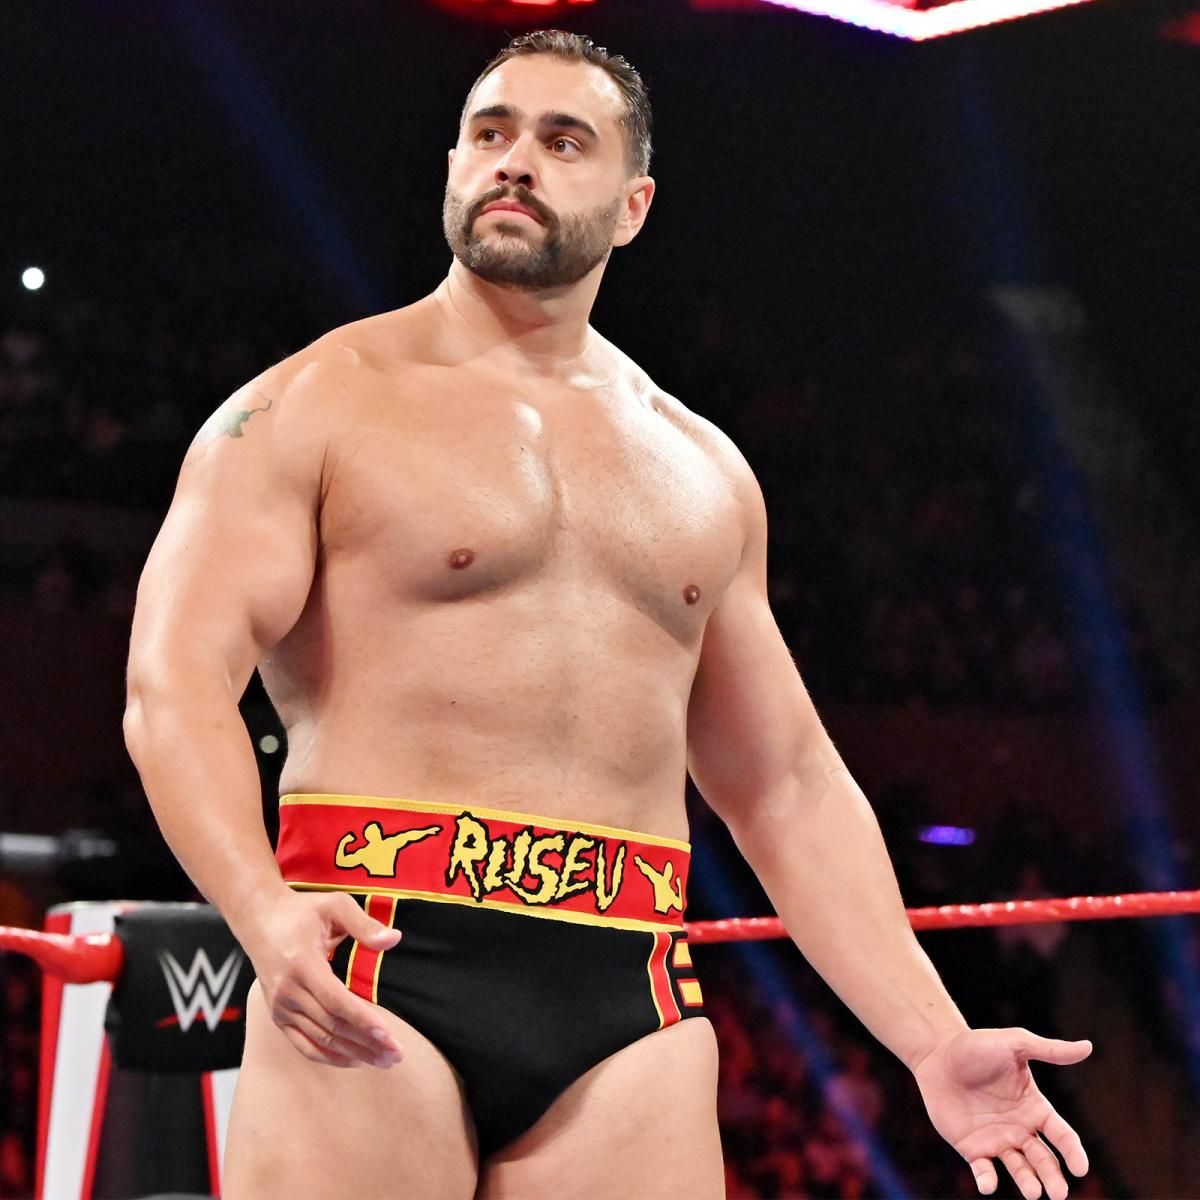 WWEs Rusev defends Lana and Bobby Lashley affair storyline